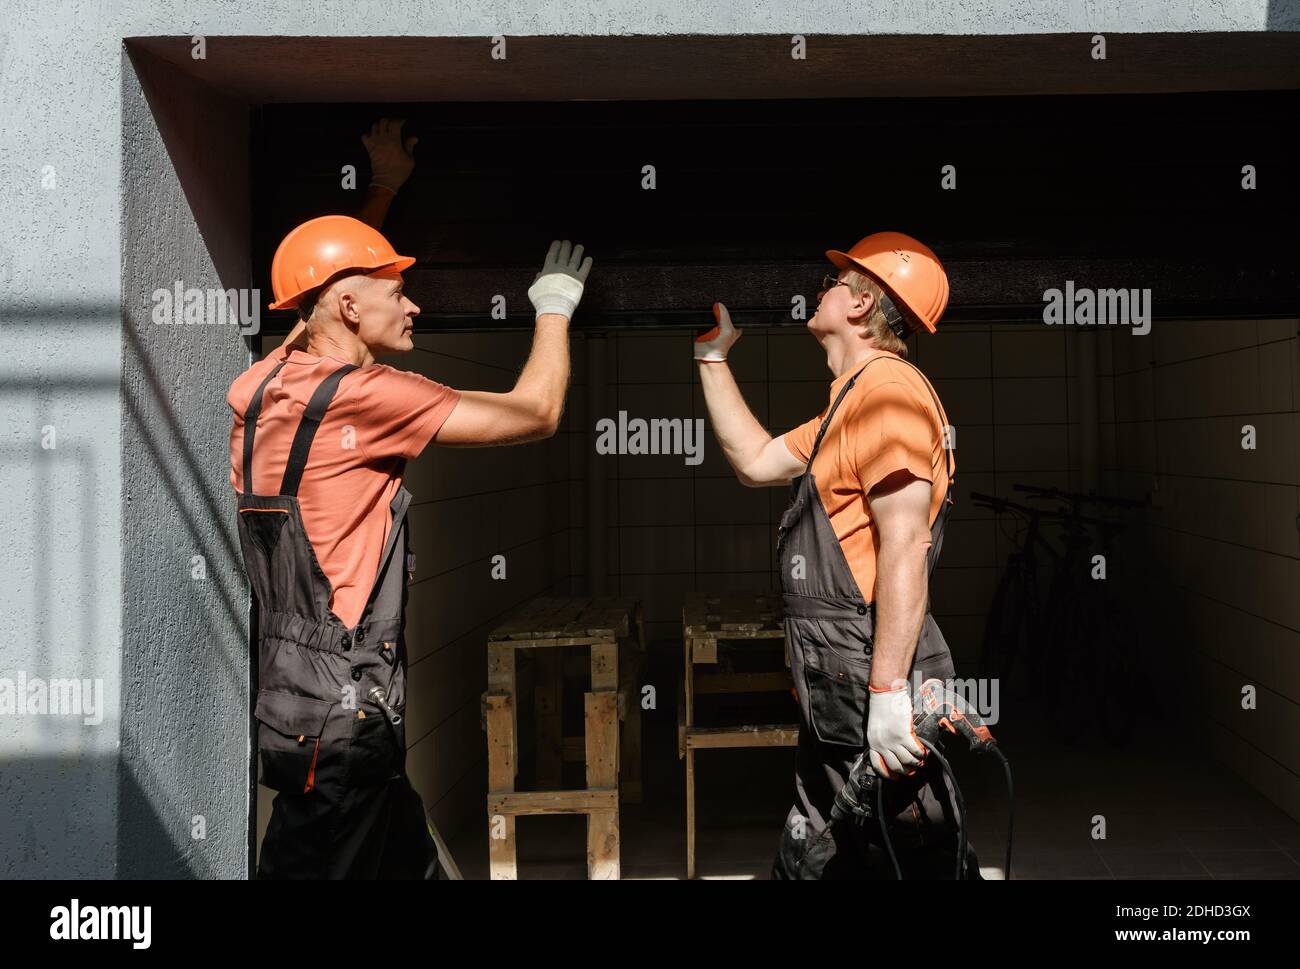 Workers are installing lift gates in the garage. Stock Photo